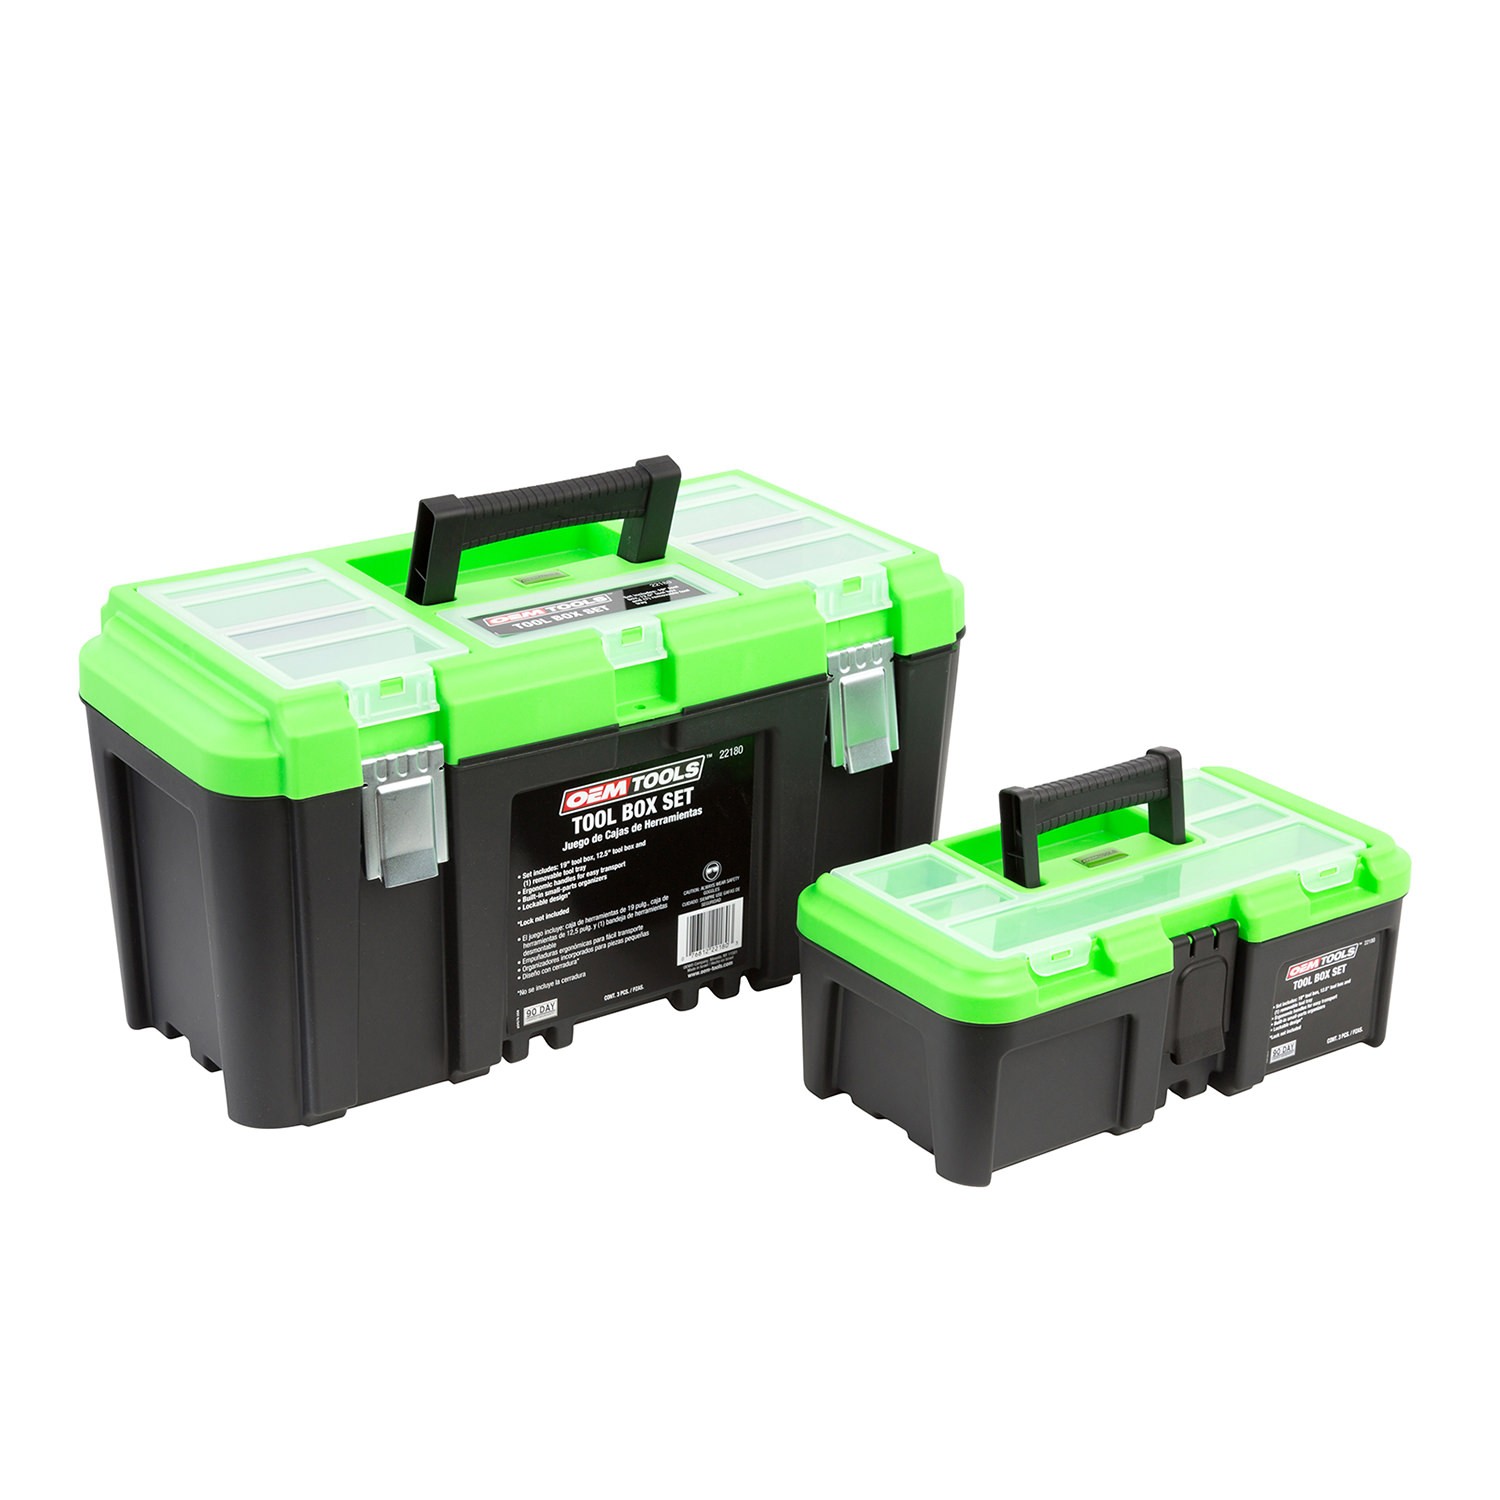 Hand Held Tool Boxes